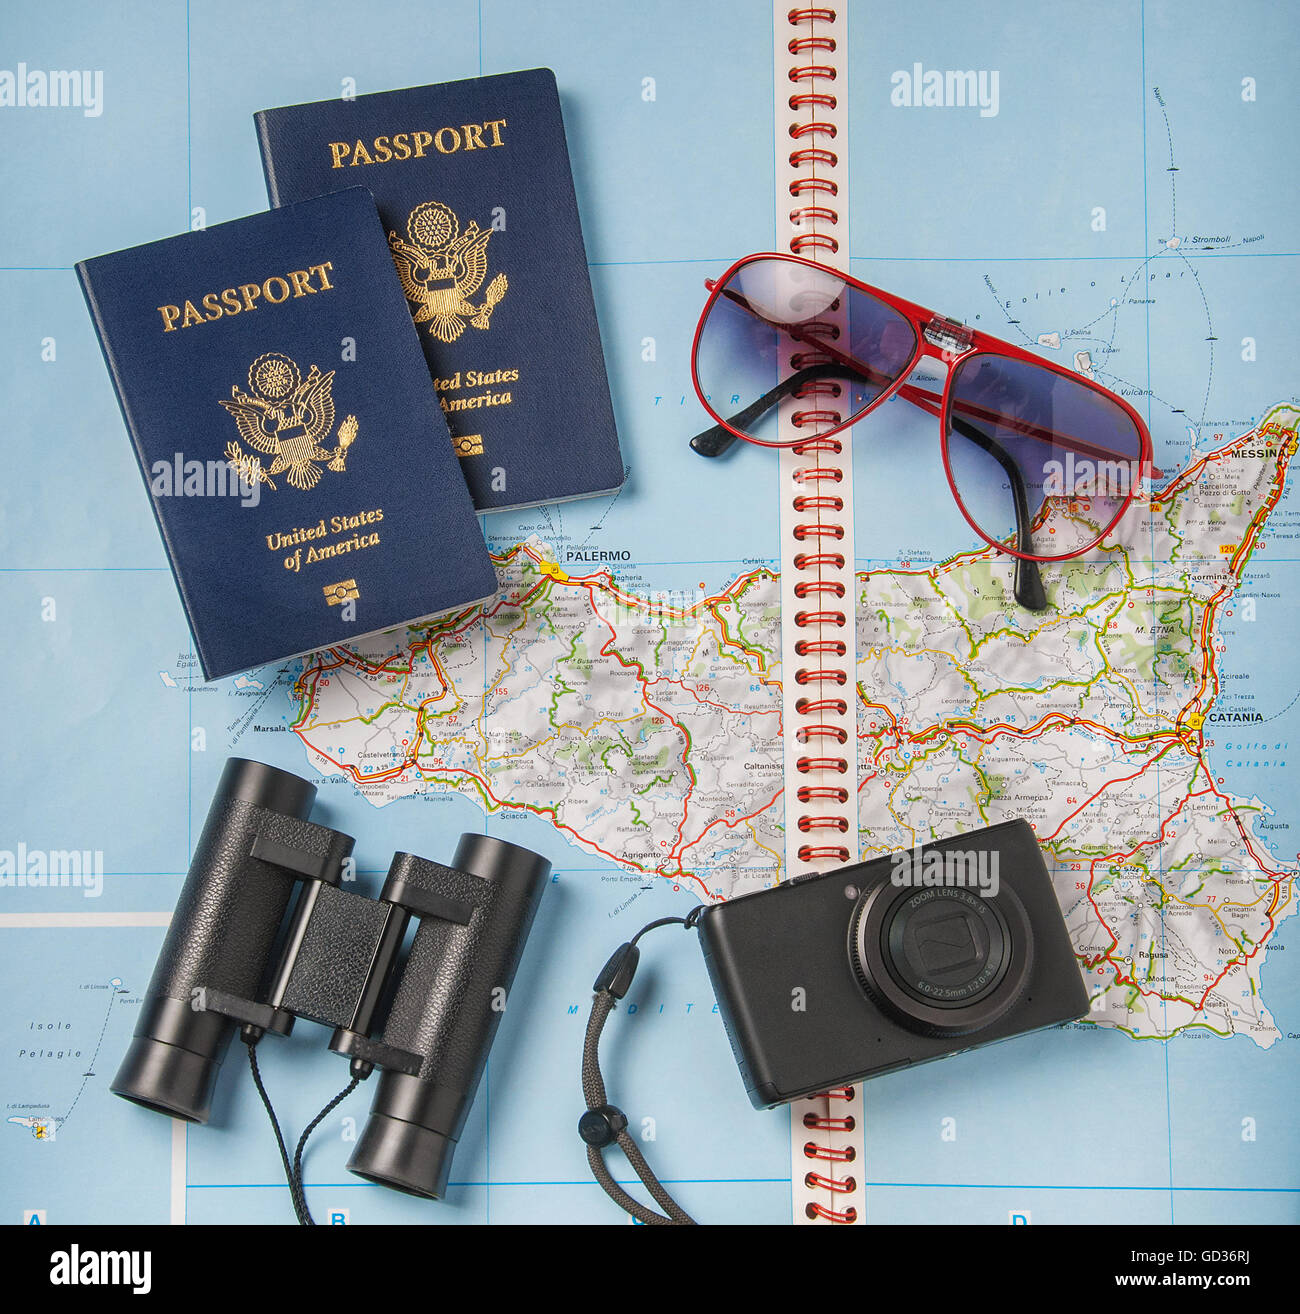 Travel vacation objects on a background Stock Photo